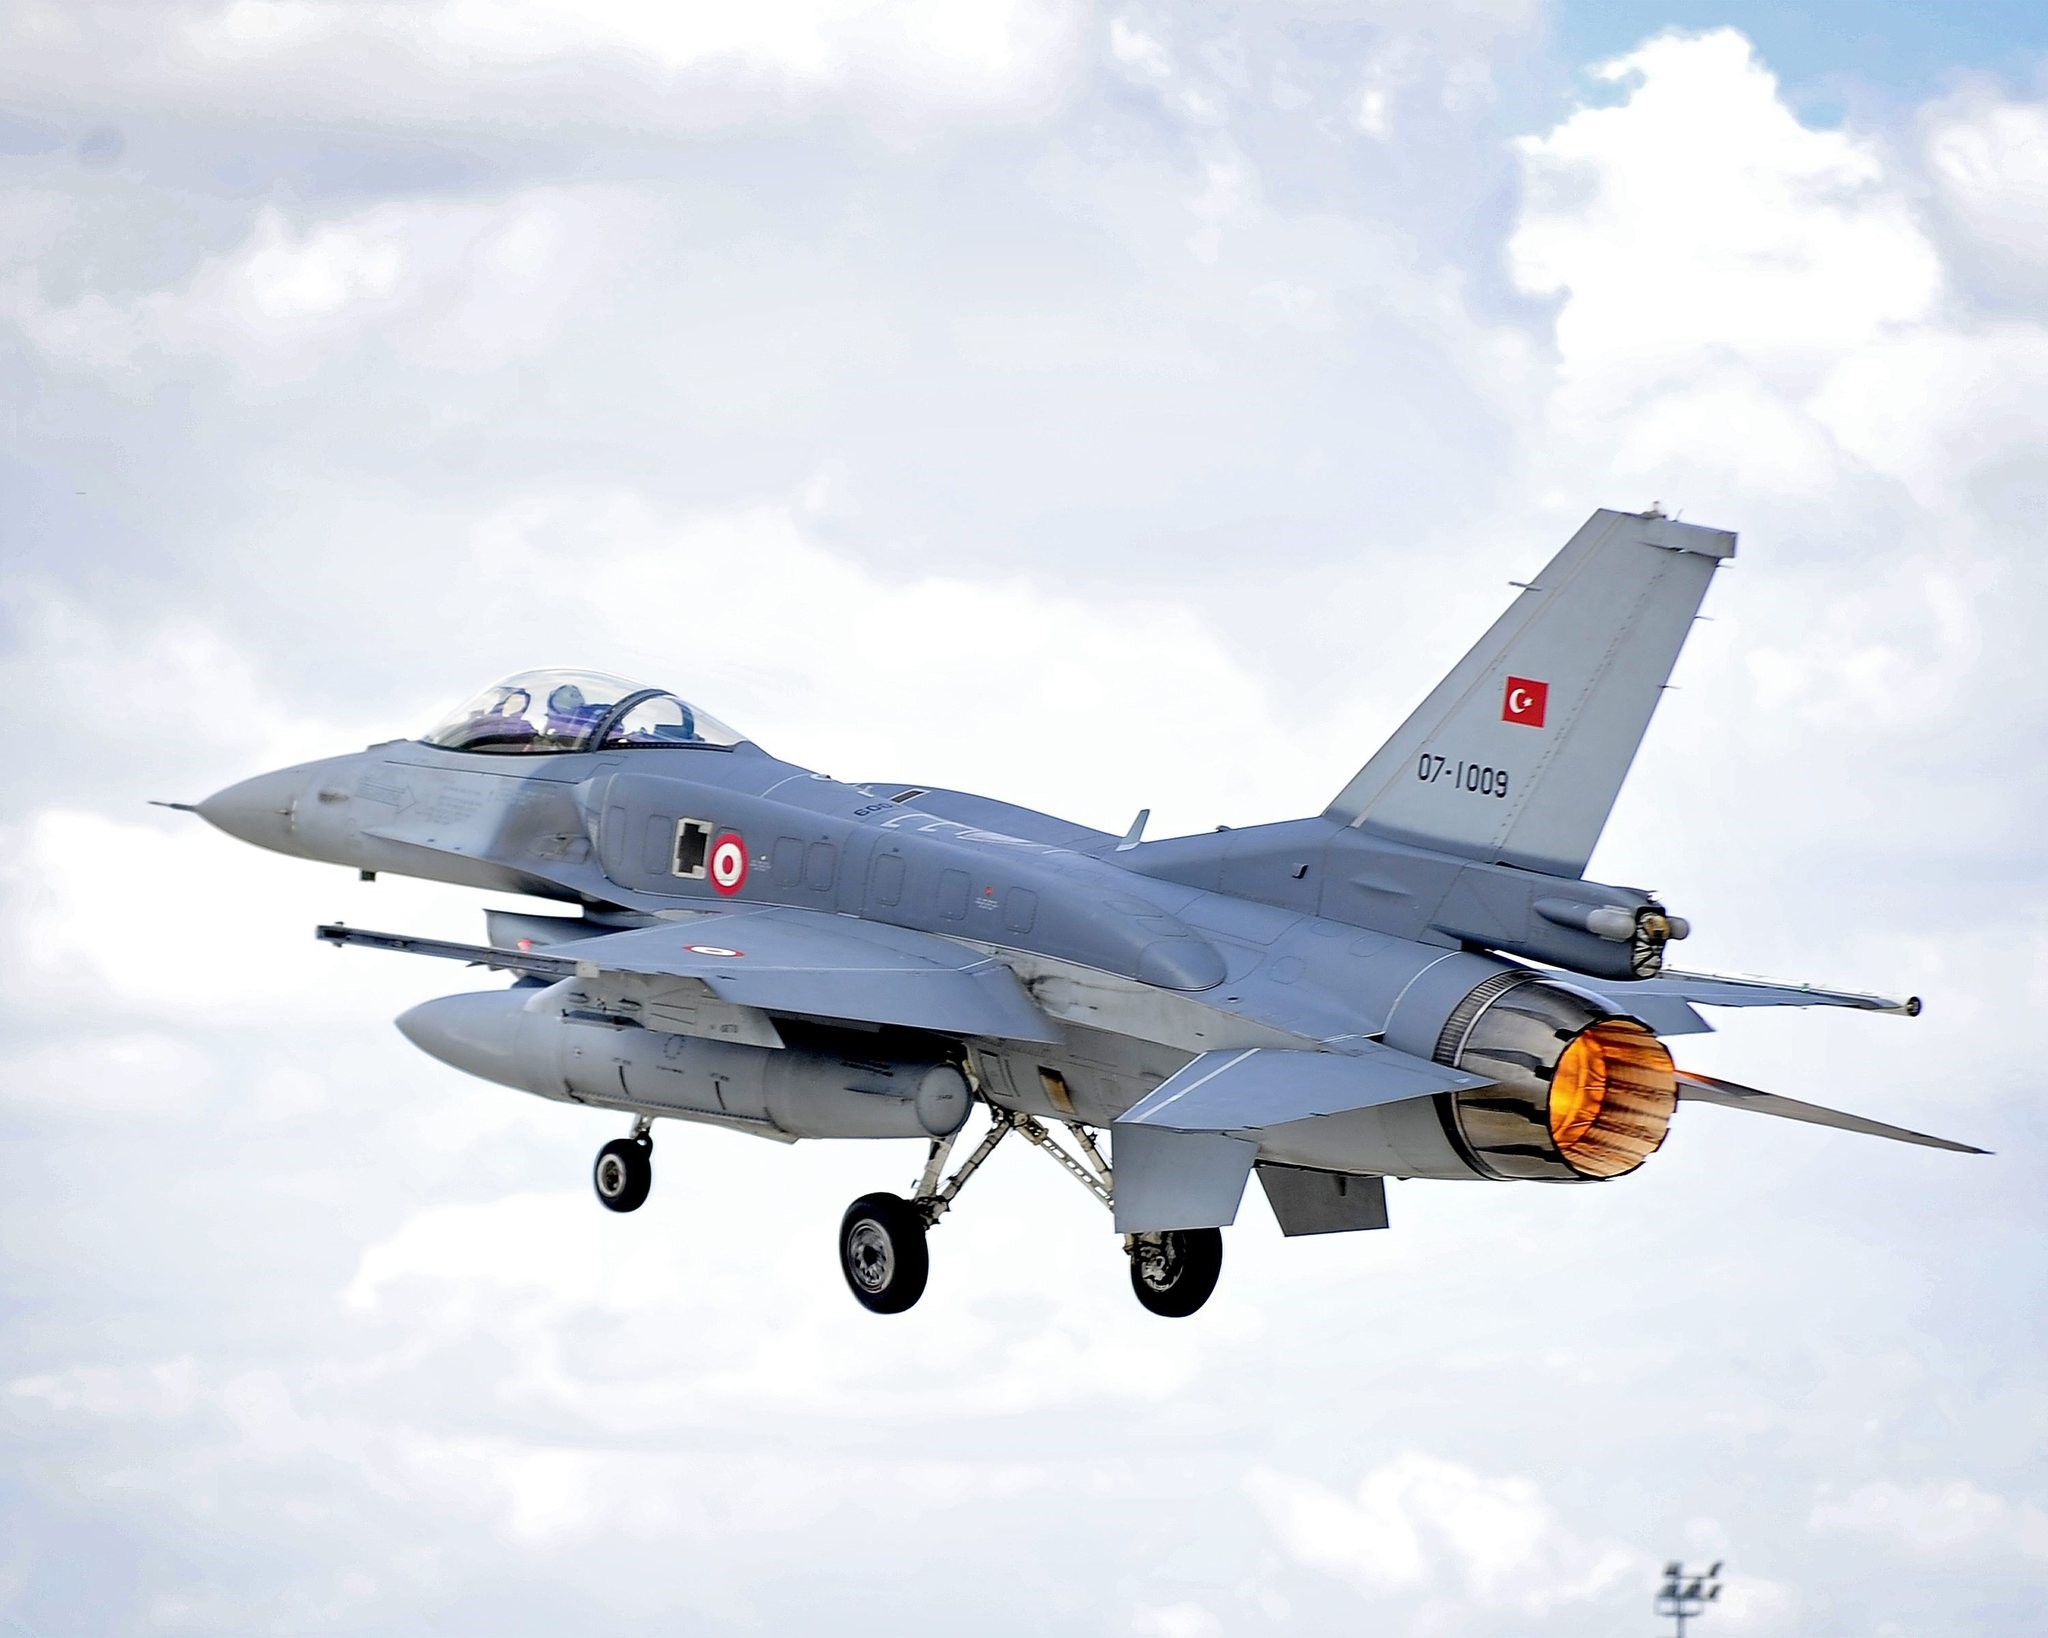 An F-16 Fighting Falcon of the Turkish Air Force (Tu00fcrk Hava Kuvvetleri) takes off on a sortie from Third Air Force Base Konya, Turkey during Exercise Anatolian Eagle. (RAF Photo)